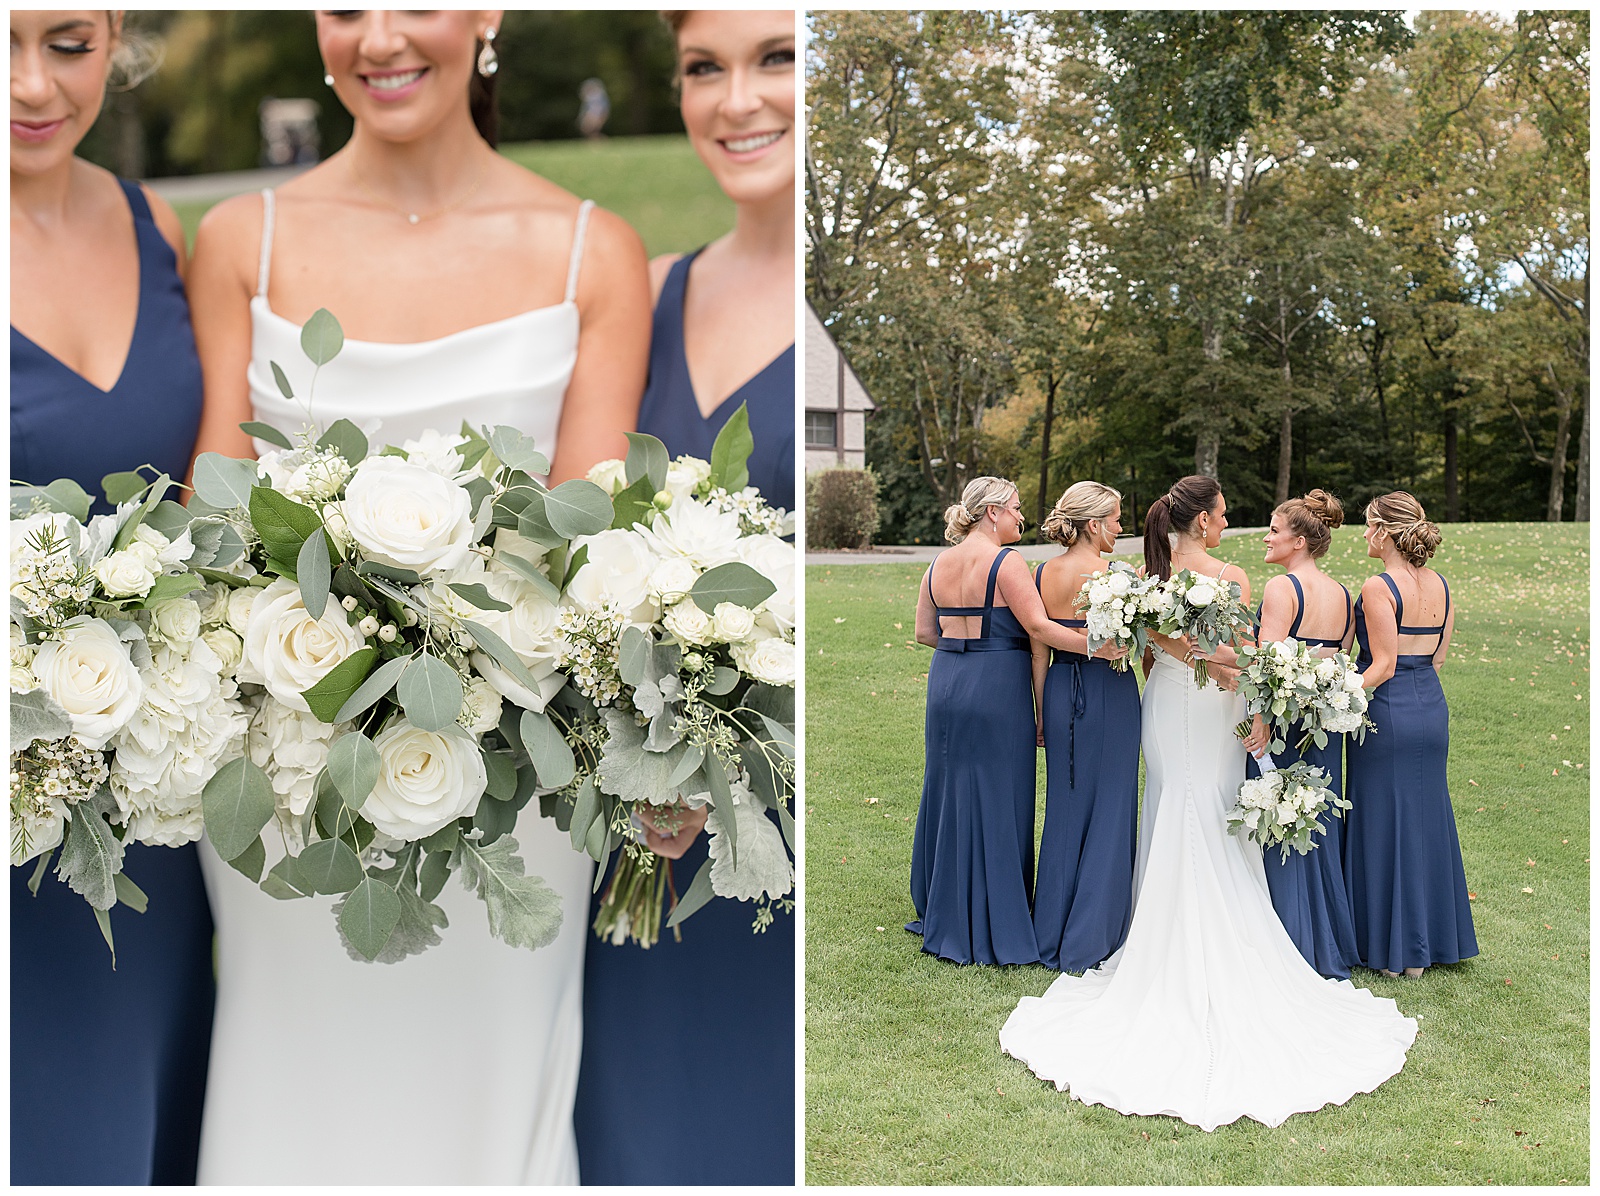 backs of bride and bridesmaids with arms around one another and bride gown train displayed on grass